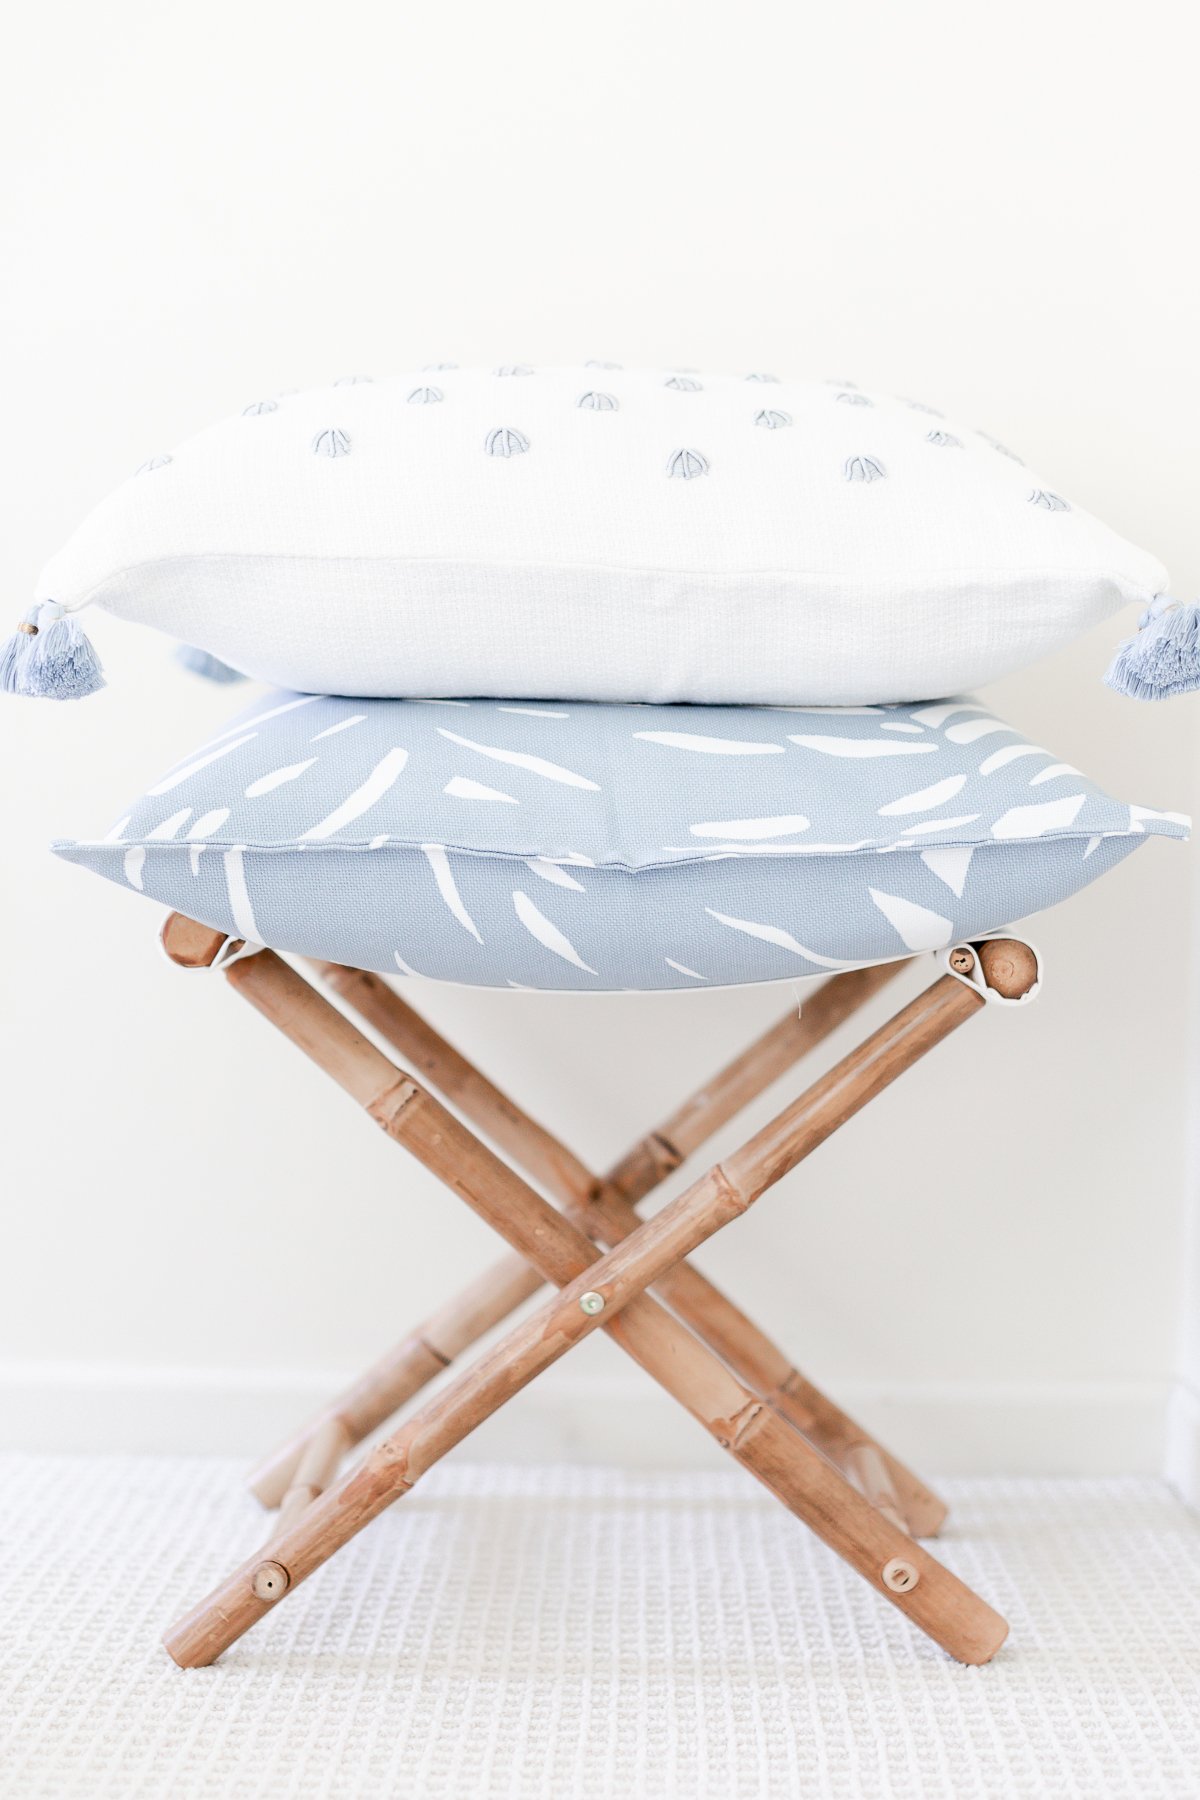 Two blue and white pillows with pillow inserts, stacked on a rattan stool.